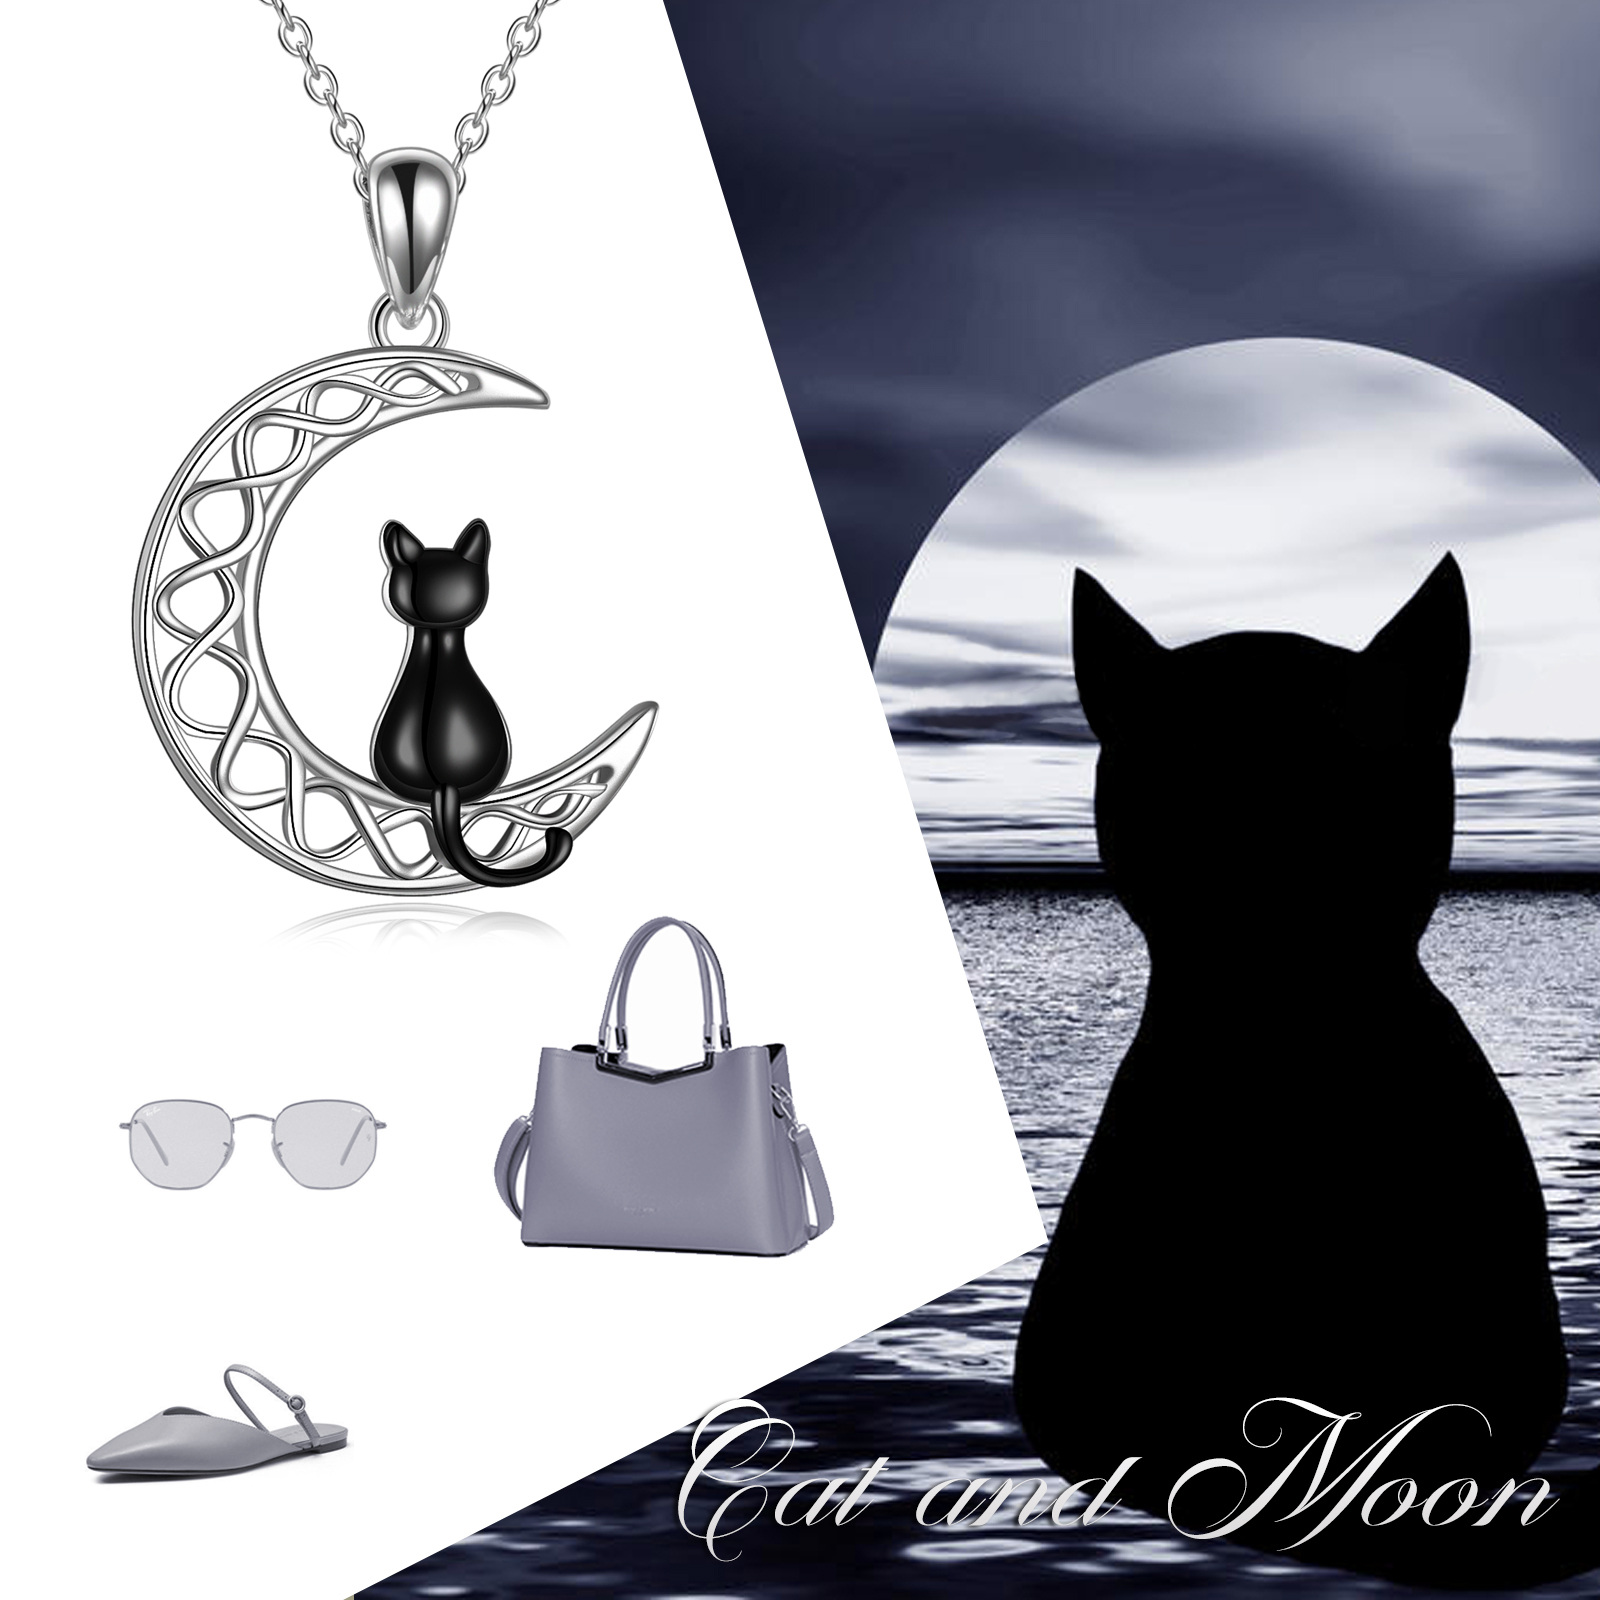 16269348481599d100e - Celtic Moon Cat Necklace for Girls Sterling Silver Irish Jewelry